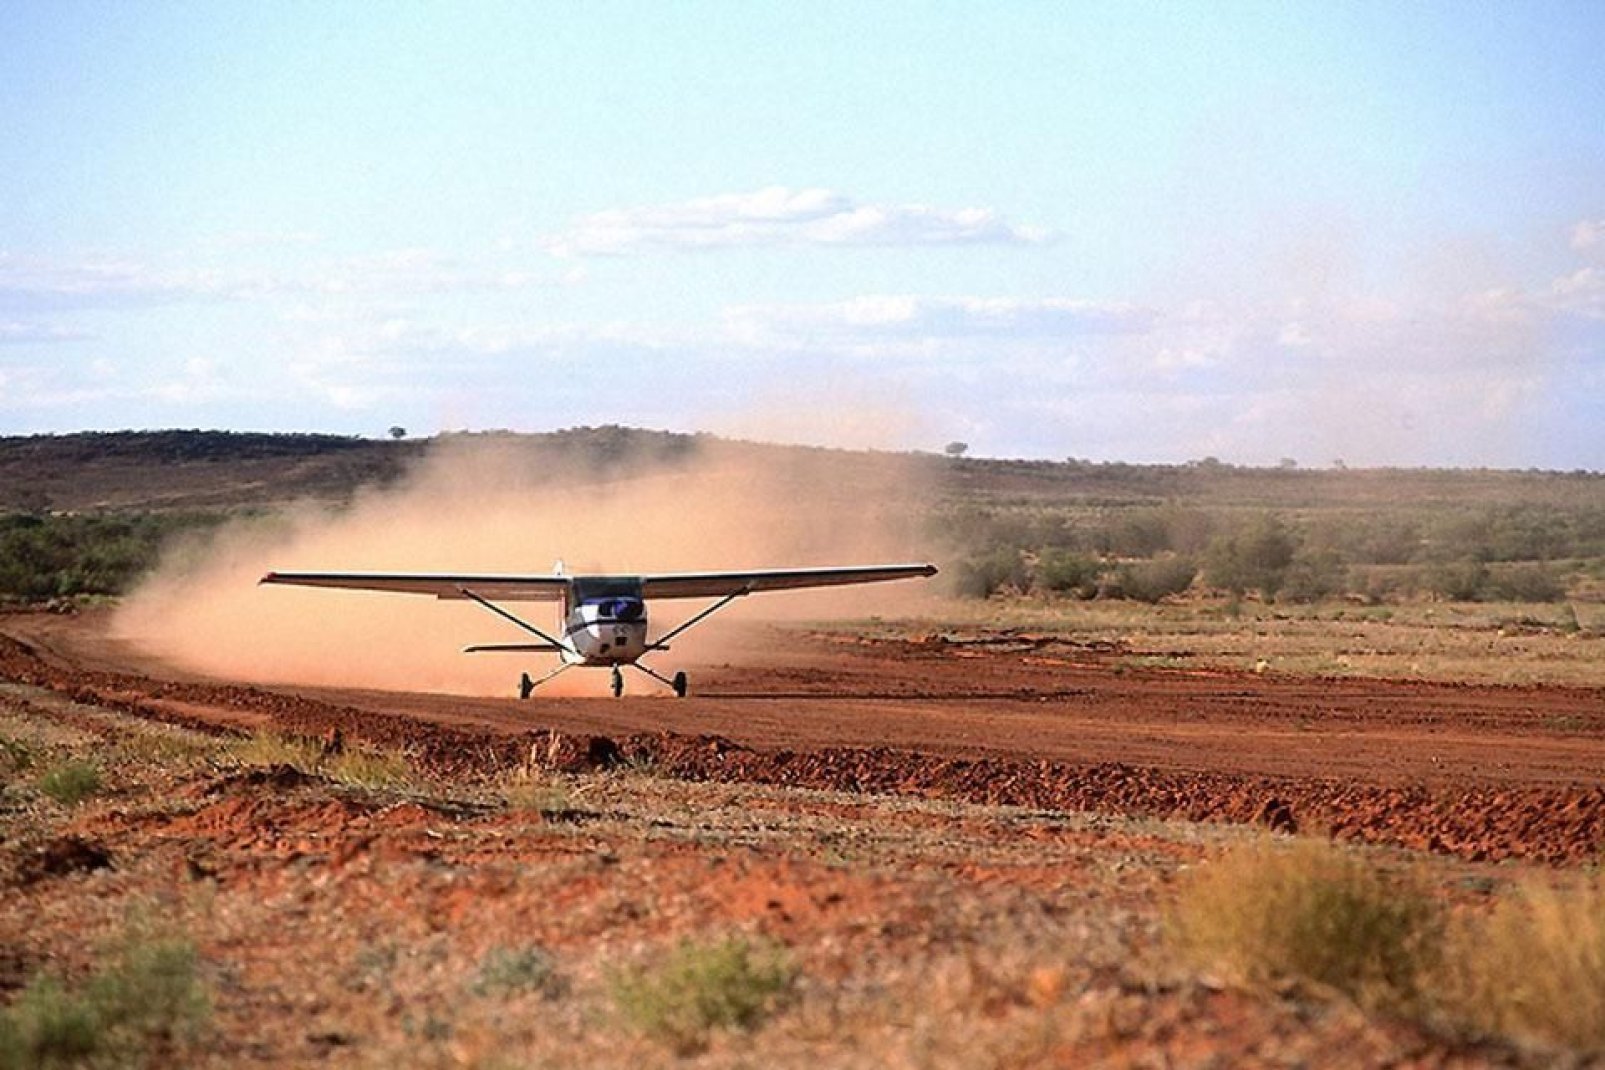 There are also daily flights to Alice Springs from various cities, including Cairns and Sydney.